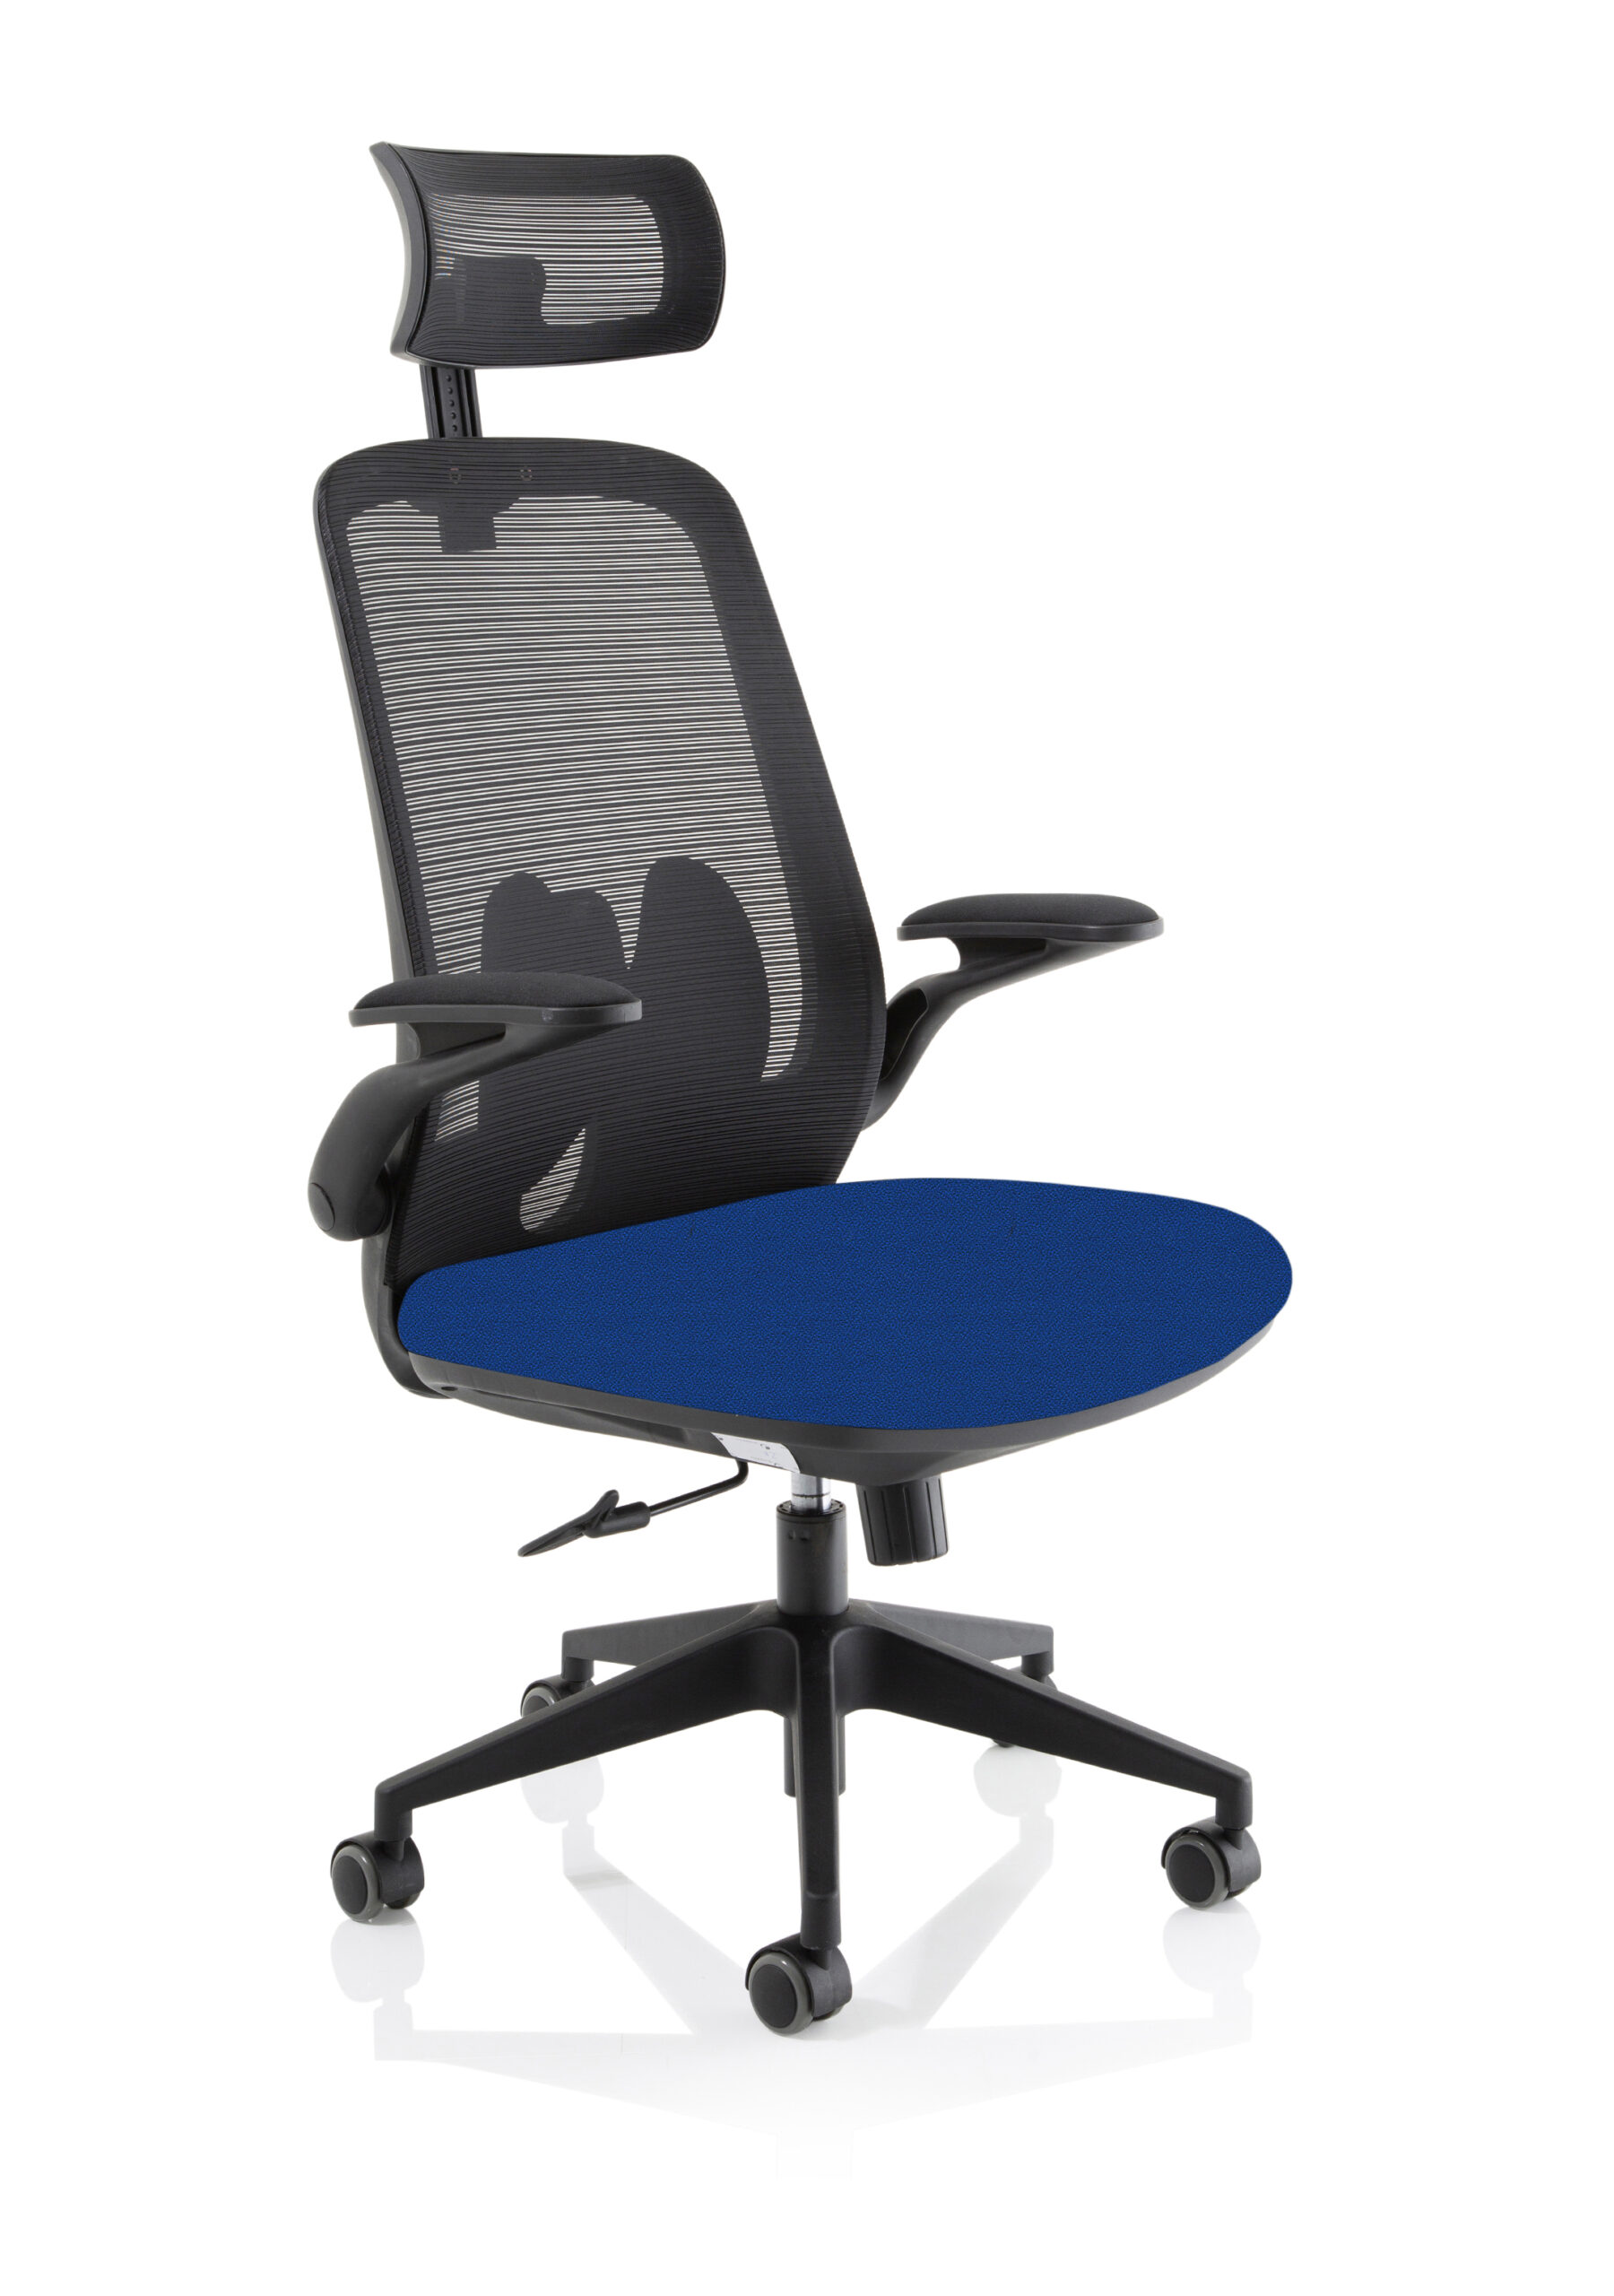 Lasino Executive Bespoke Fabric Seat Stevia Blue Mesh Chair With Folding Arms